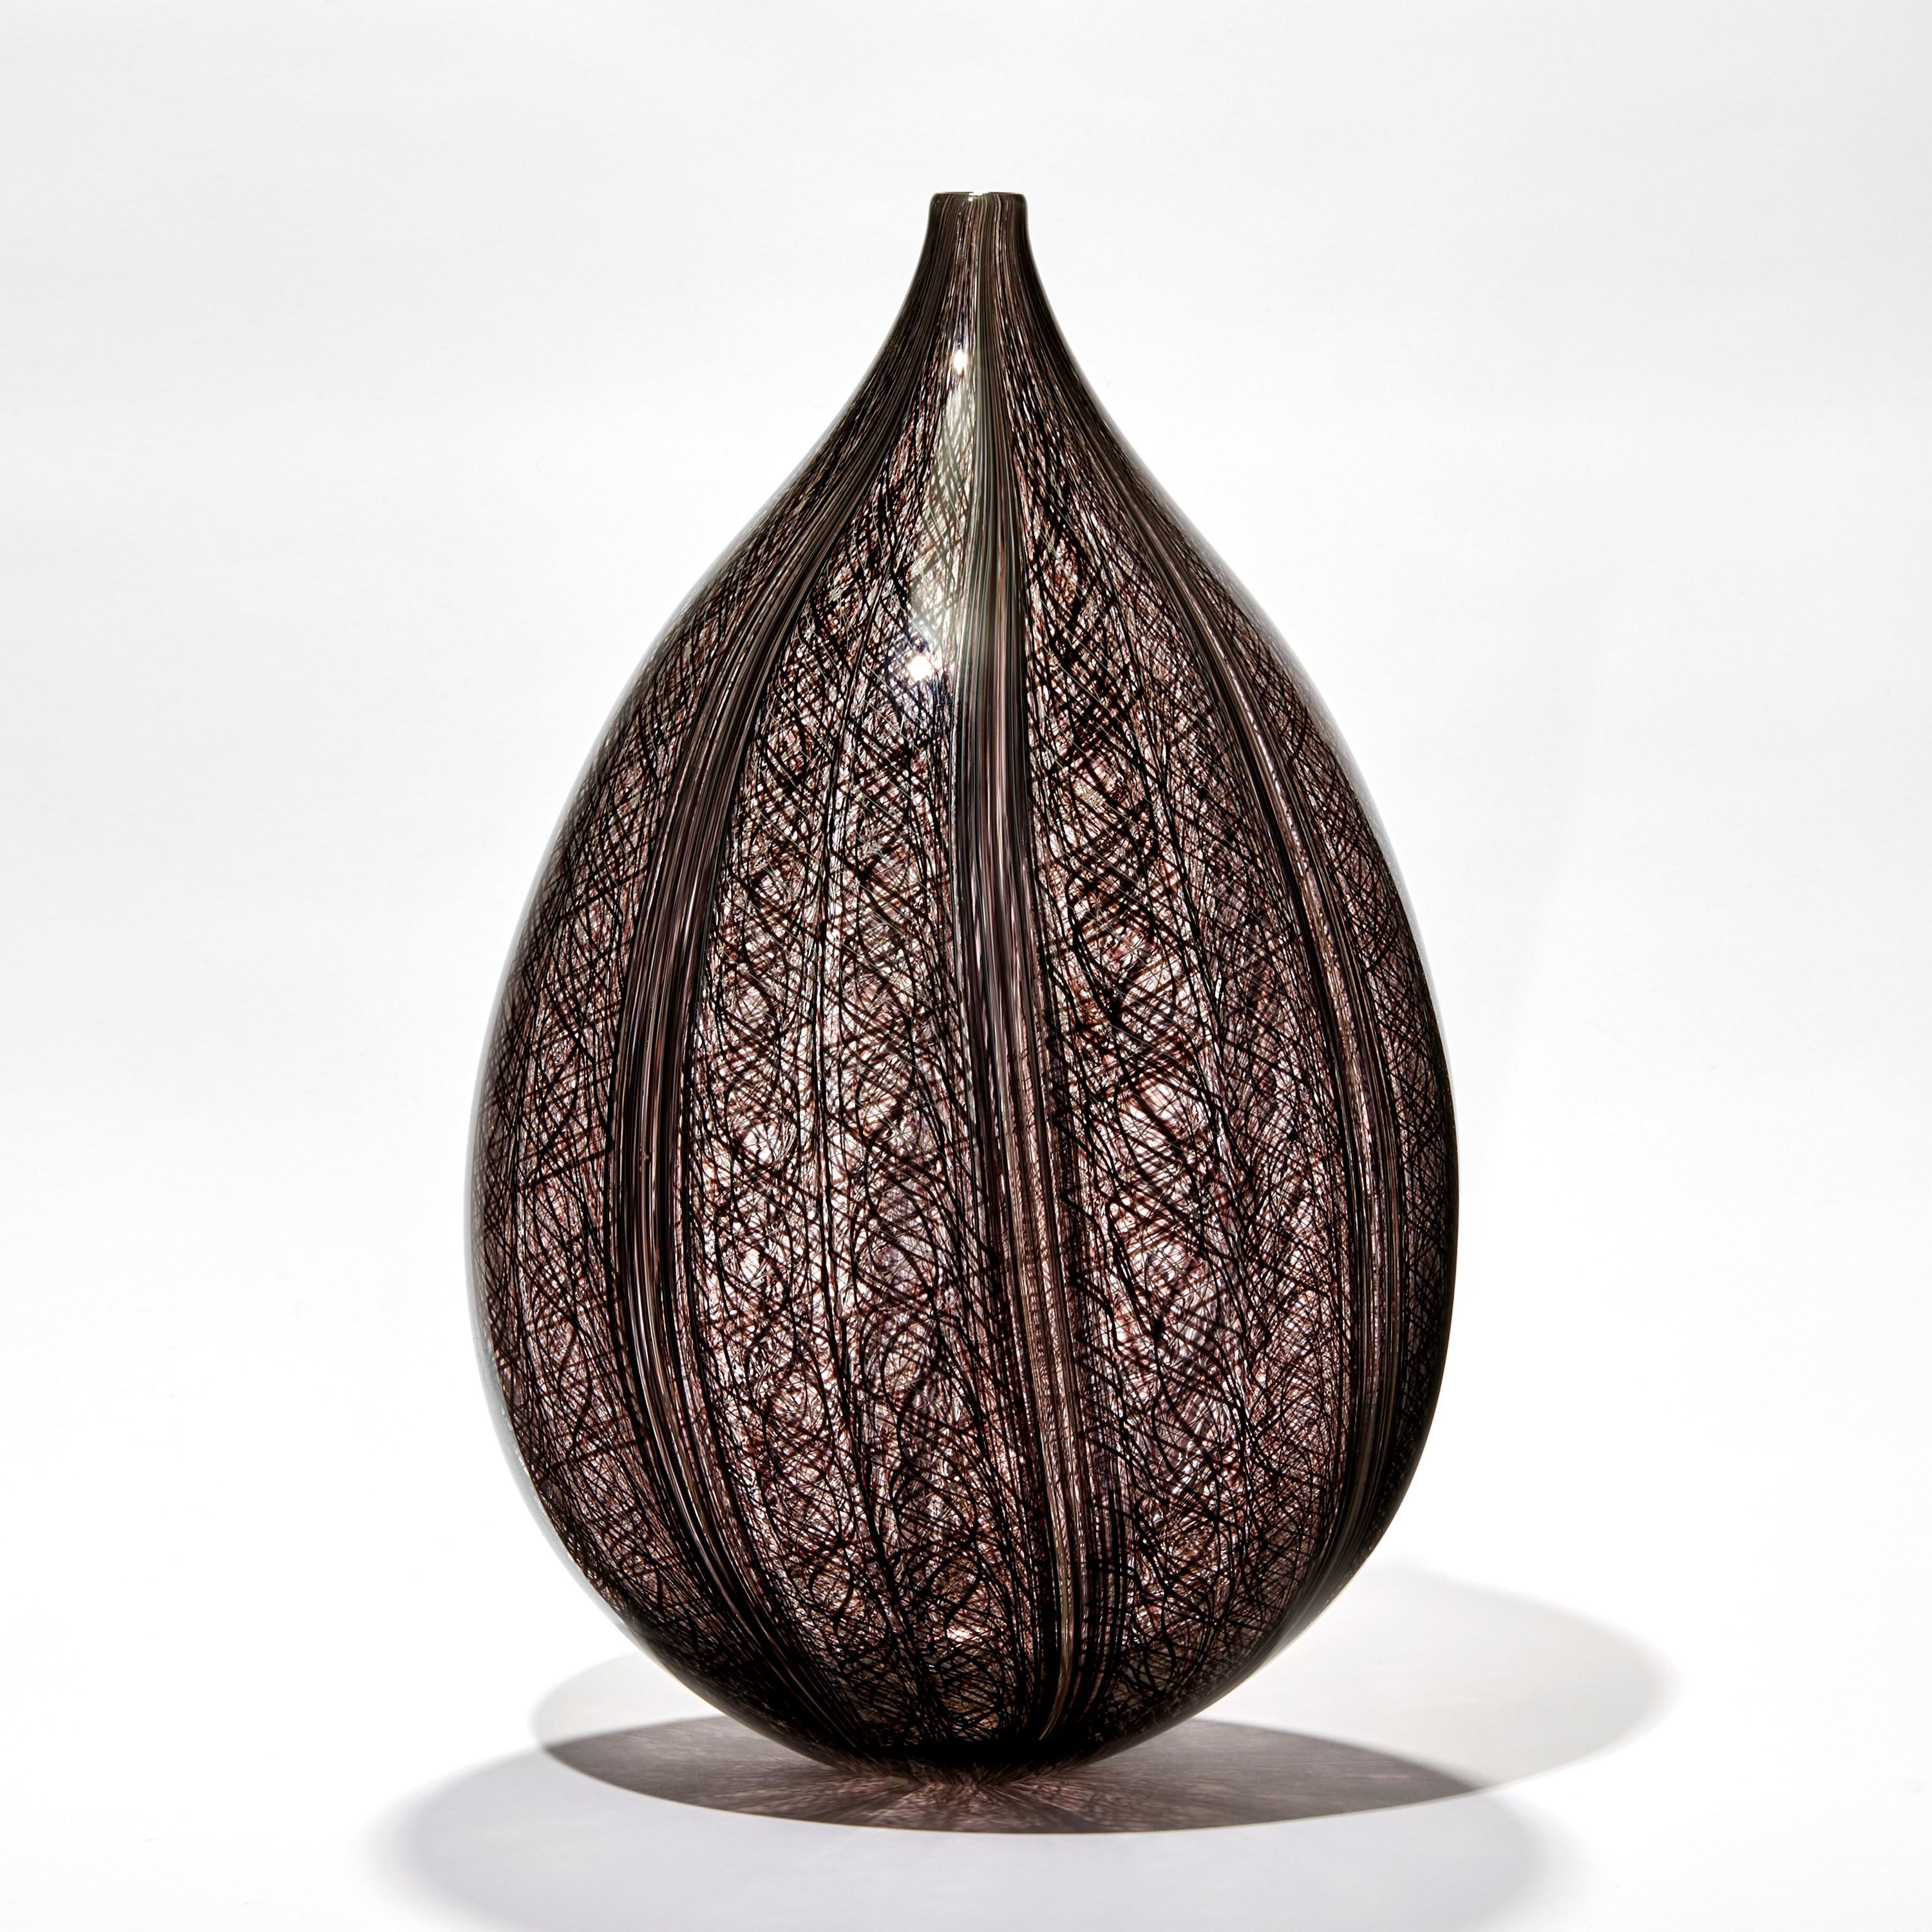 Threads IV is a unique handblown clear and aubergine/dark brown glass sculpture by the Swedish artist Ann Wåhlström. Created to form an elegant teardrop shape, finishing in a refined thin neck, very fine canes of dark brown/aubergine glass appear